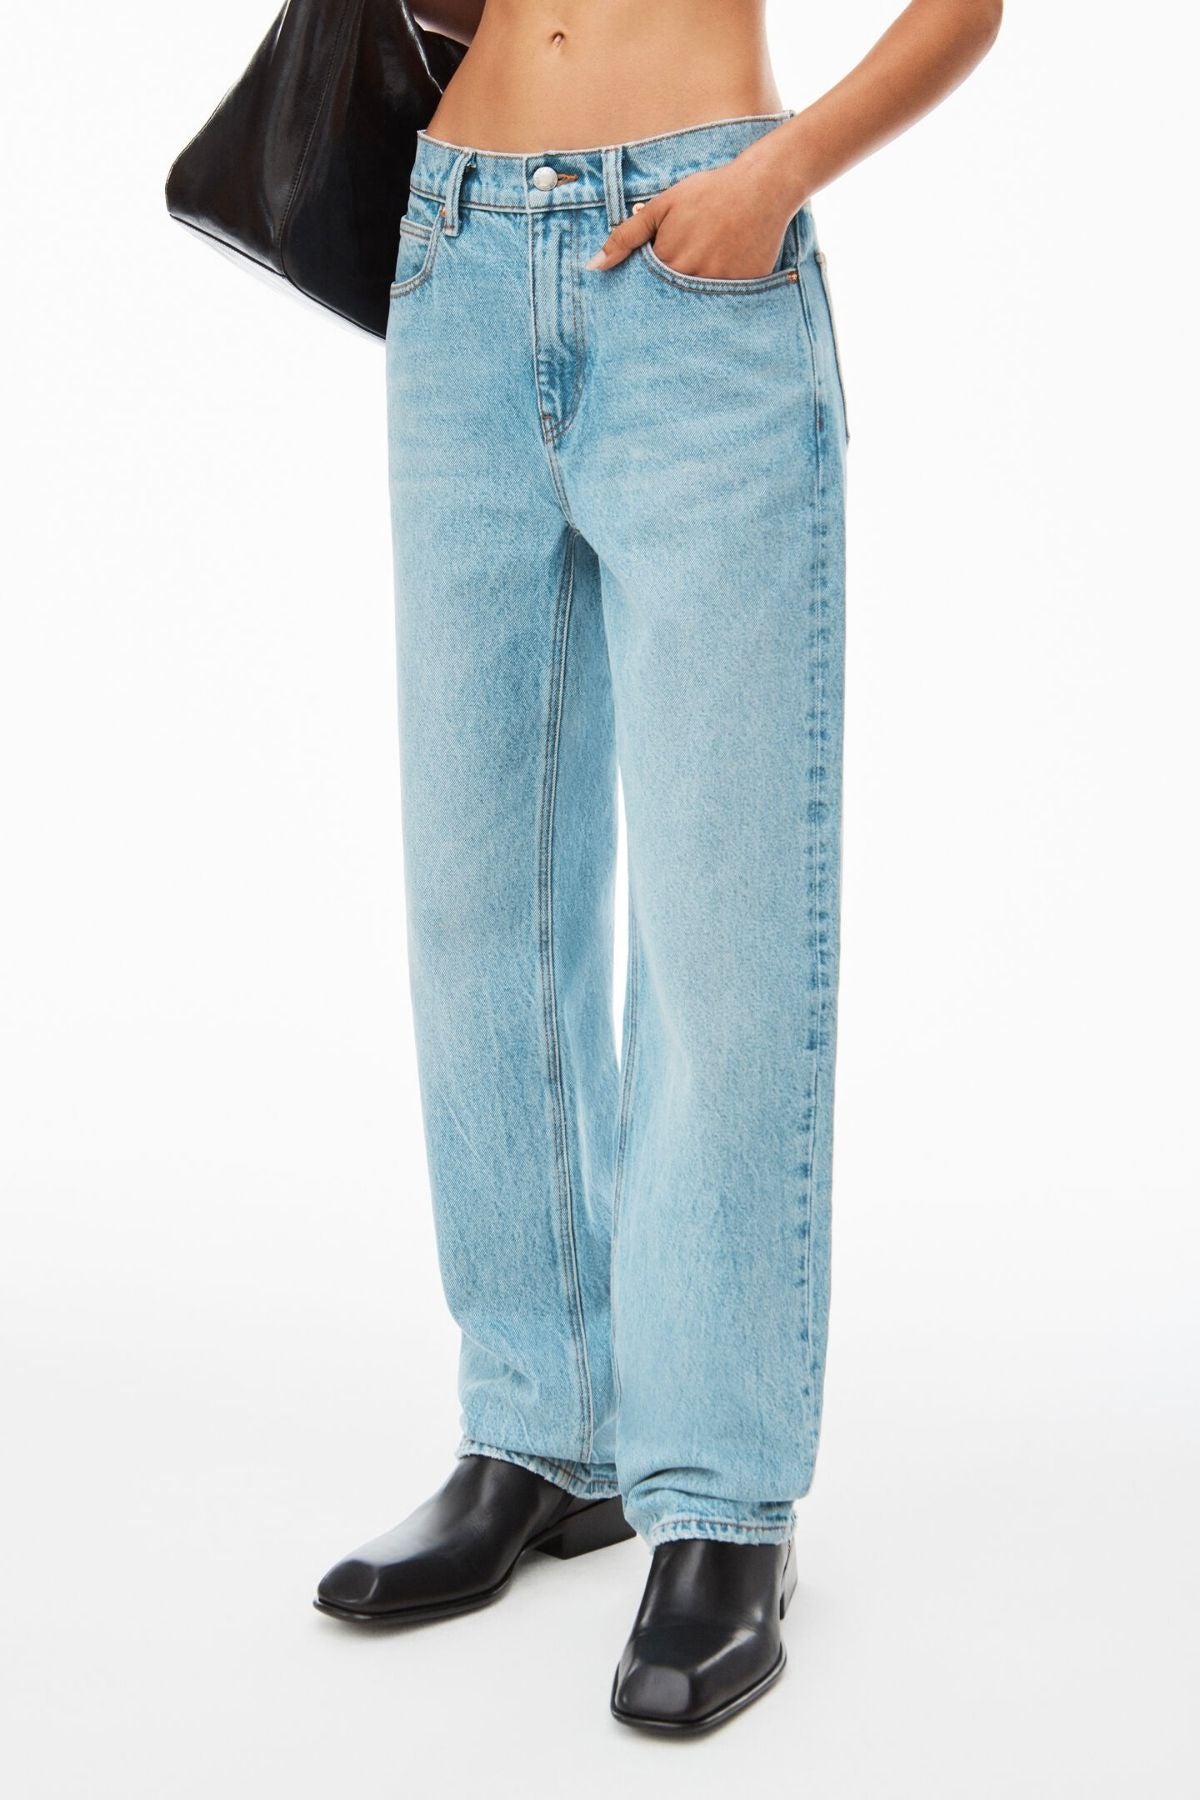 Alexander Wang EZ Mid Rise Relaxed Straight Jean - Vintage Faded Indigo